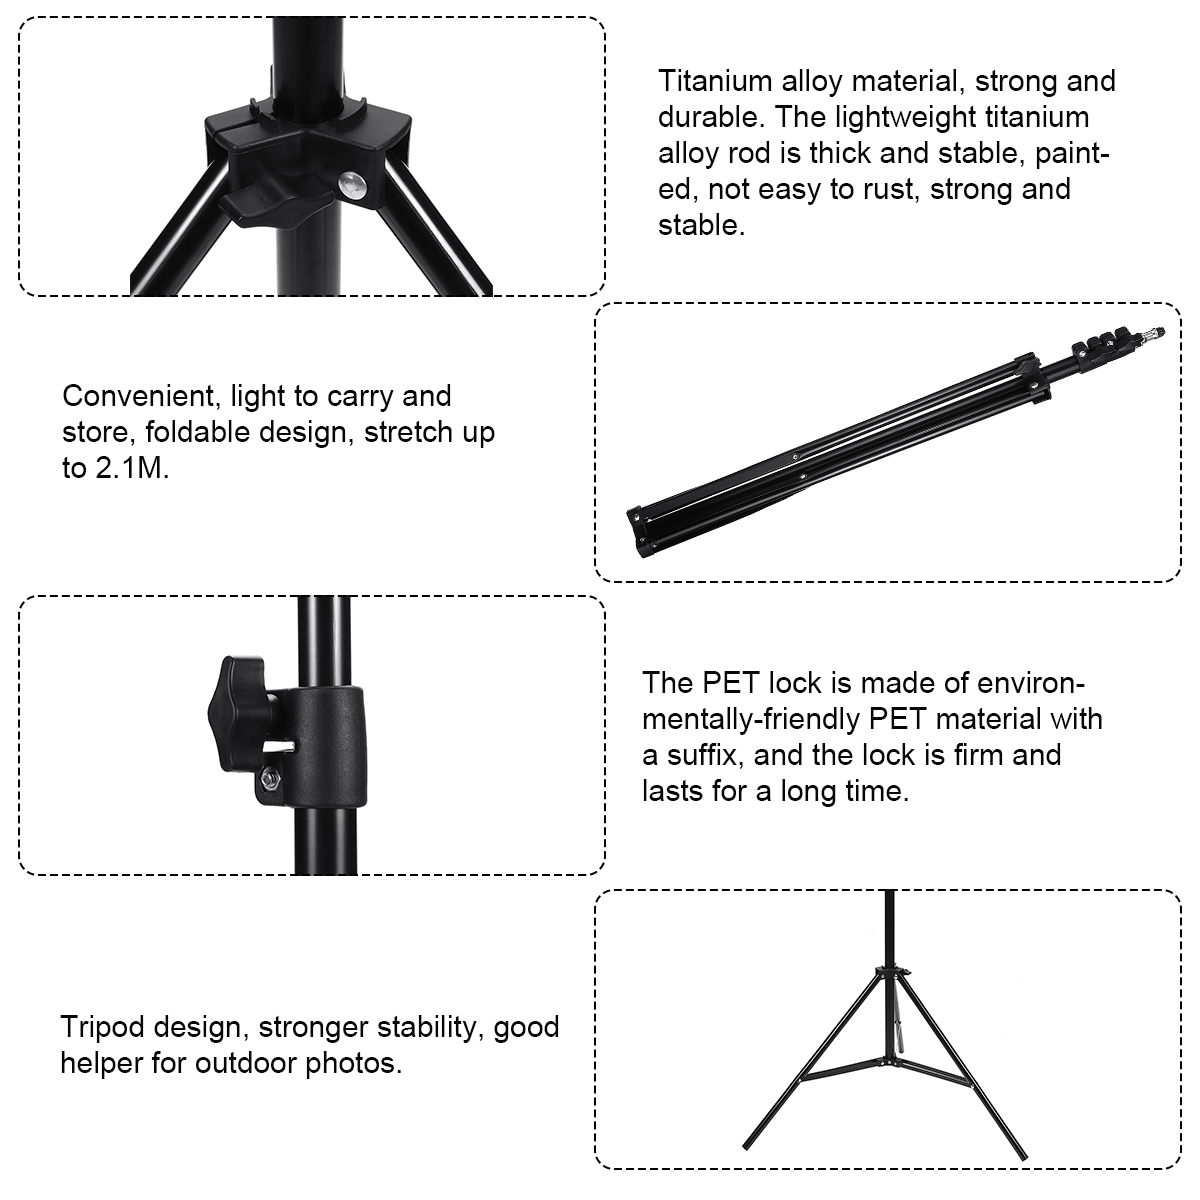 21m-Foldable-Lamp-Holder-Camping-Outdoor-Portable-Tent-Table-Hanger-Hook-Light-Fix-Stand-Camping-Lig-1935366-3